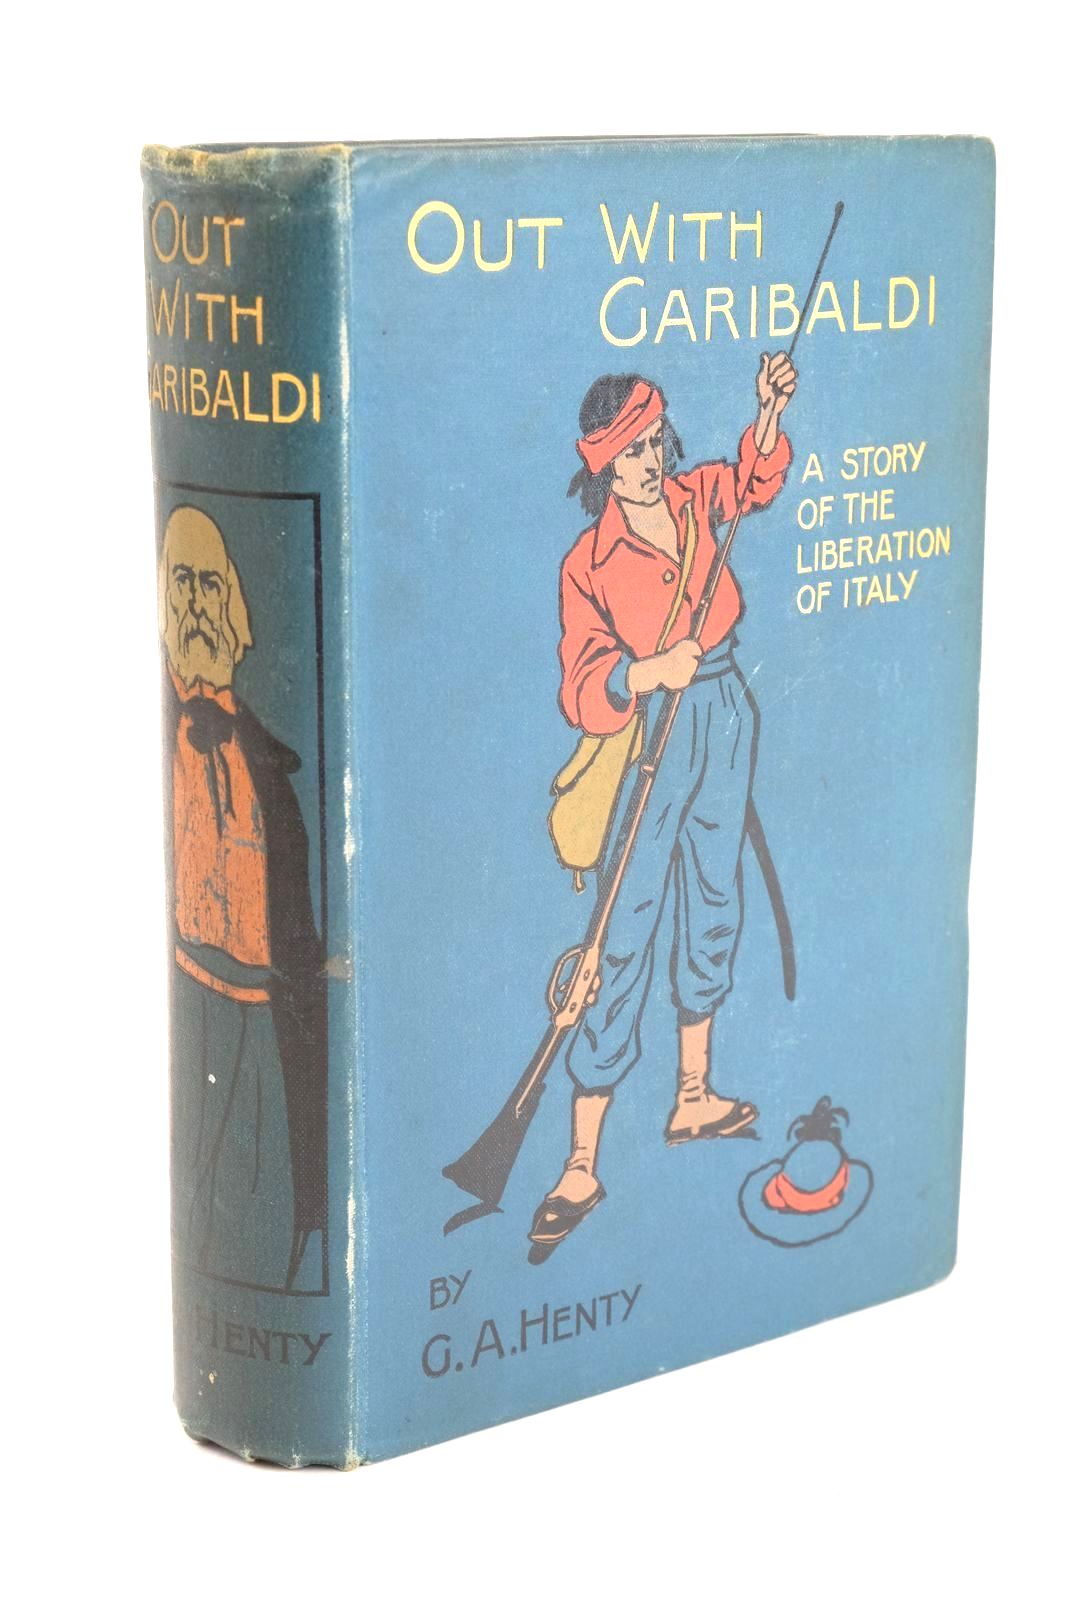 Photo of OUT WITH GARIBALDI written by Henty, G.A. illustrated by Rainey, William published by Blackie & Son Ltd. (STOCK CODE: 1324702)  for sale by Stella & Rose's Books